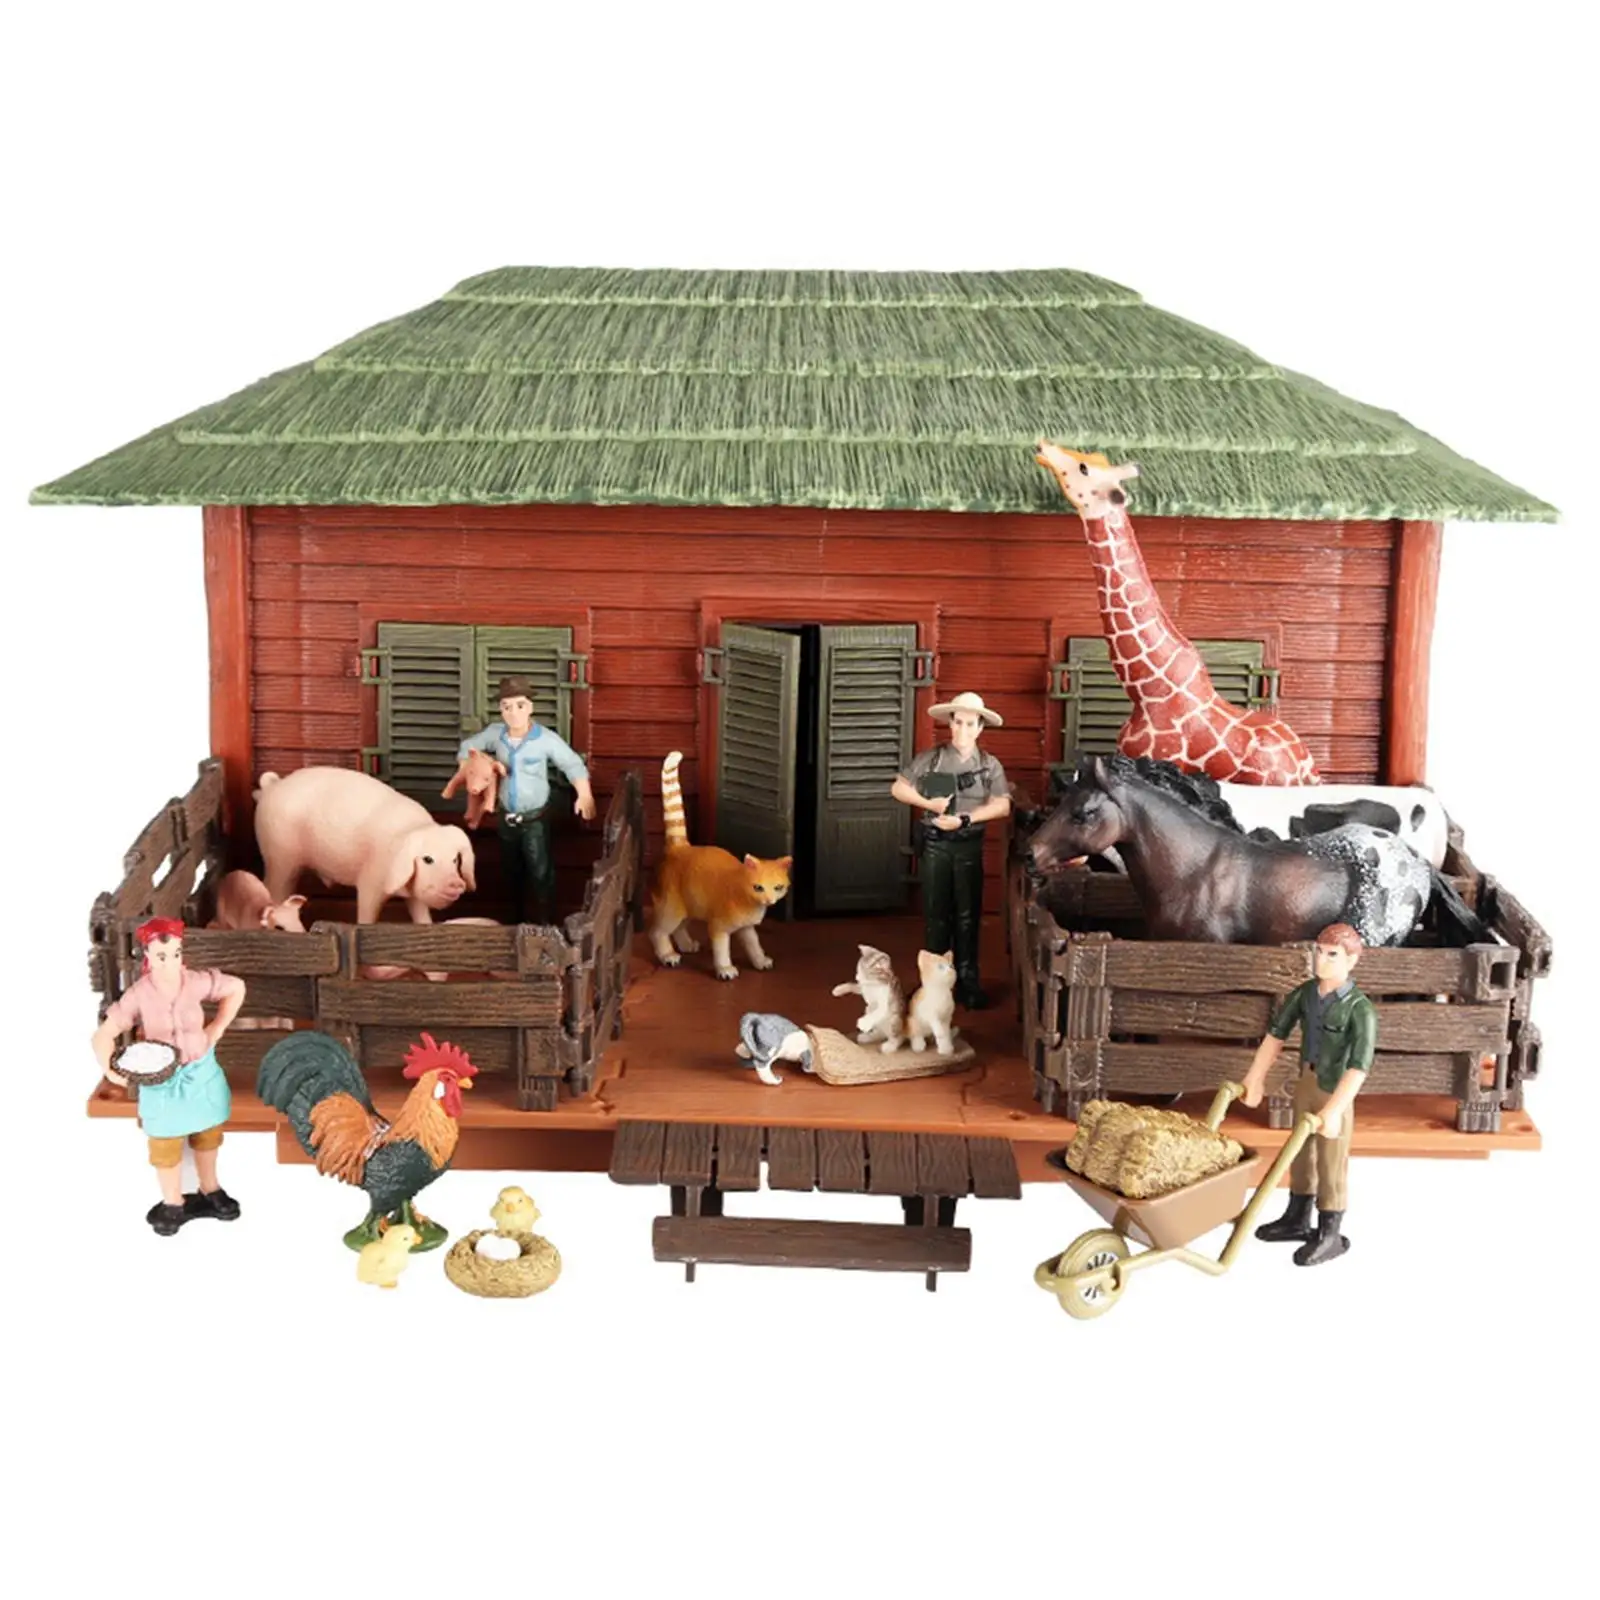 

Farm House Model Action Figures Playset Farmhouse Figurines Barn Toy Set for Kids Preschool 3 4 5 6 7 Years Old Child